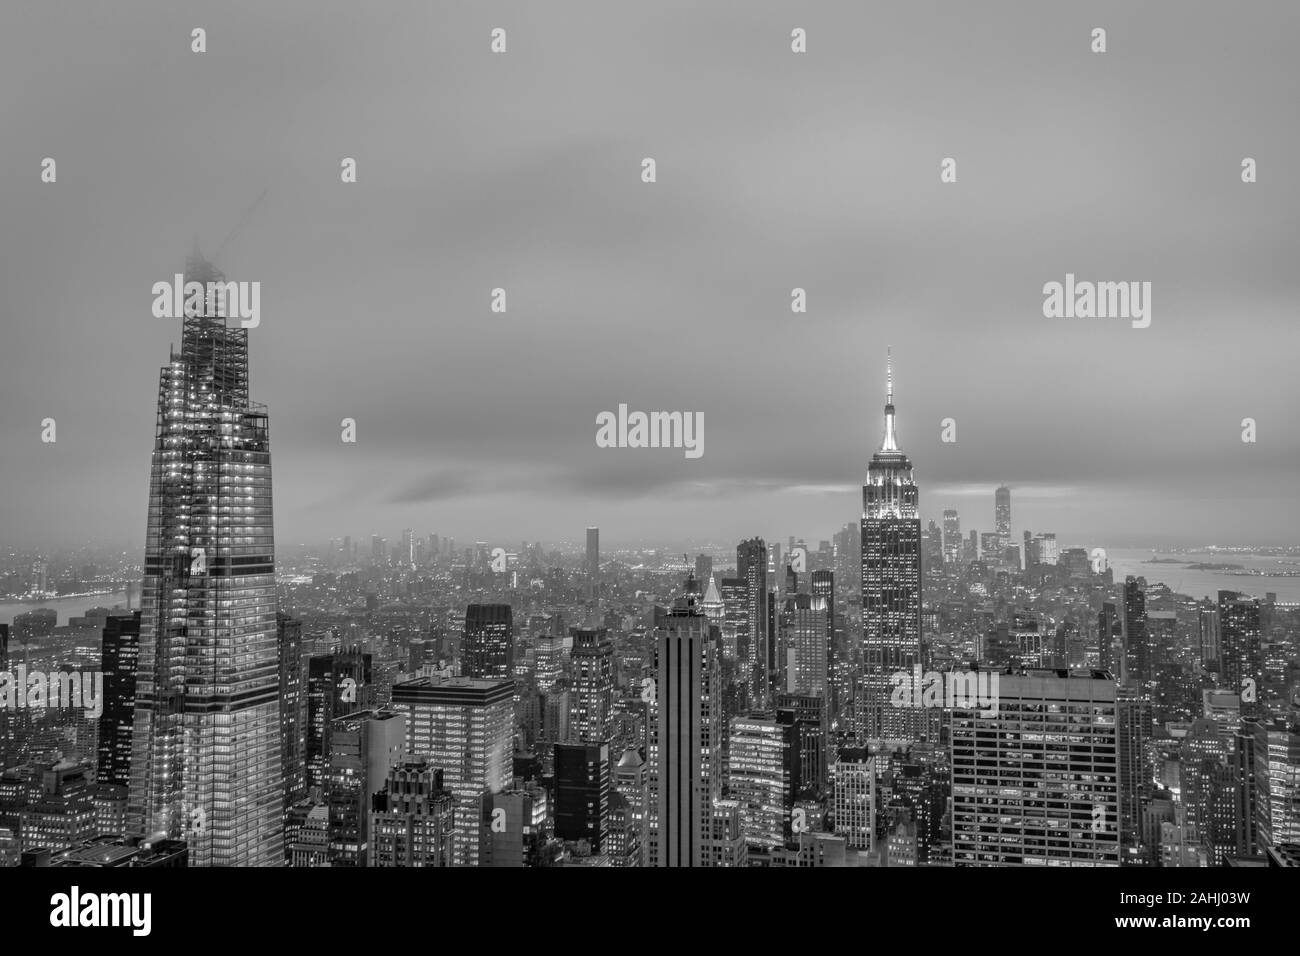 New York skyline  from Top of The Rock at sunset black and white image. Stock Photo